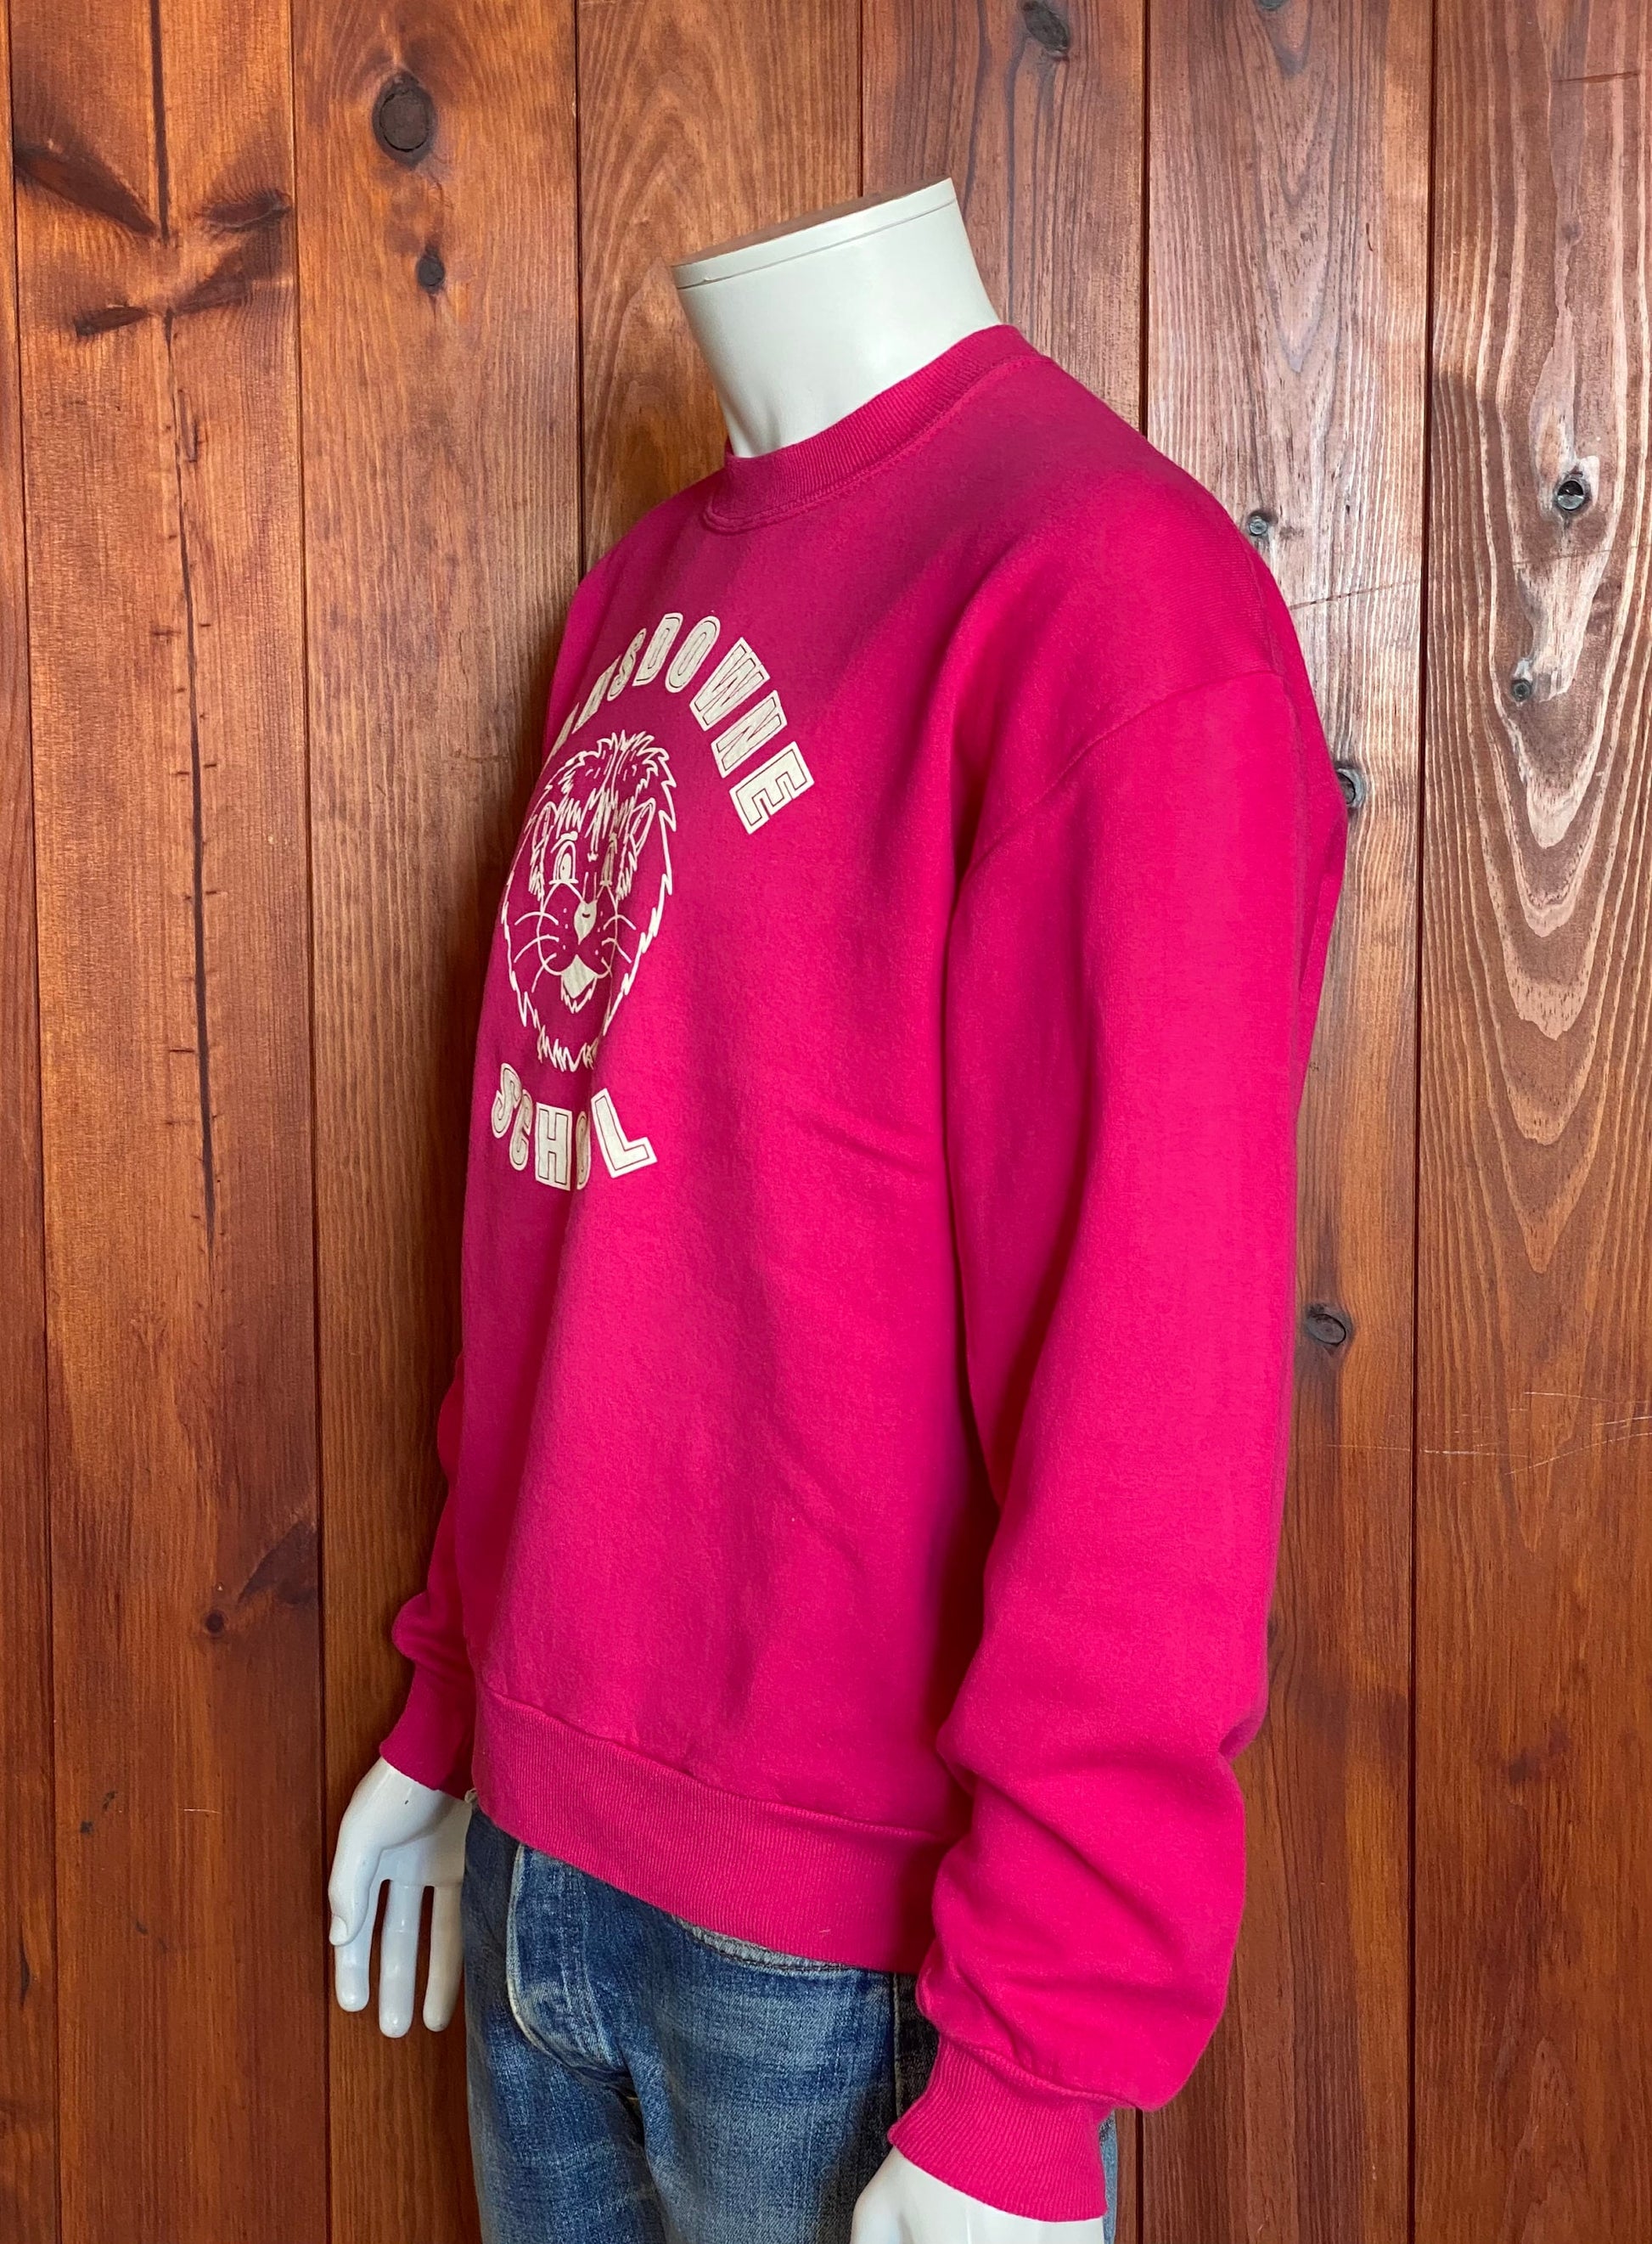 "Large 90s Lansdowne School Vintage Sweatshirt: Classic Retro Apparel Made in USA by Jerzees"